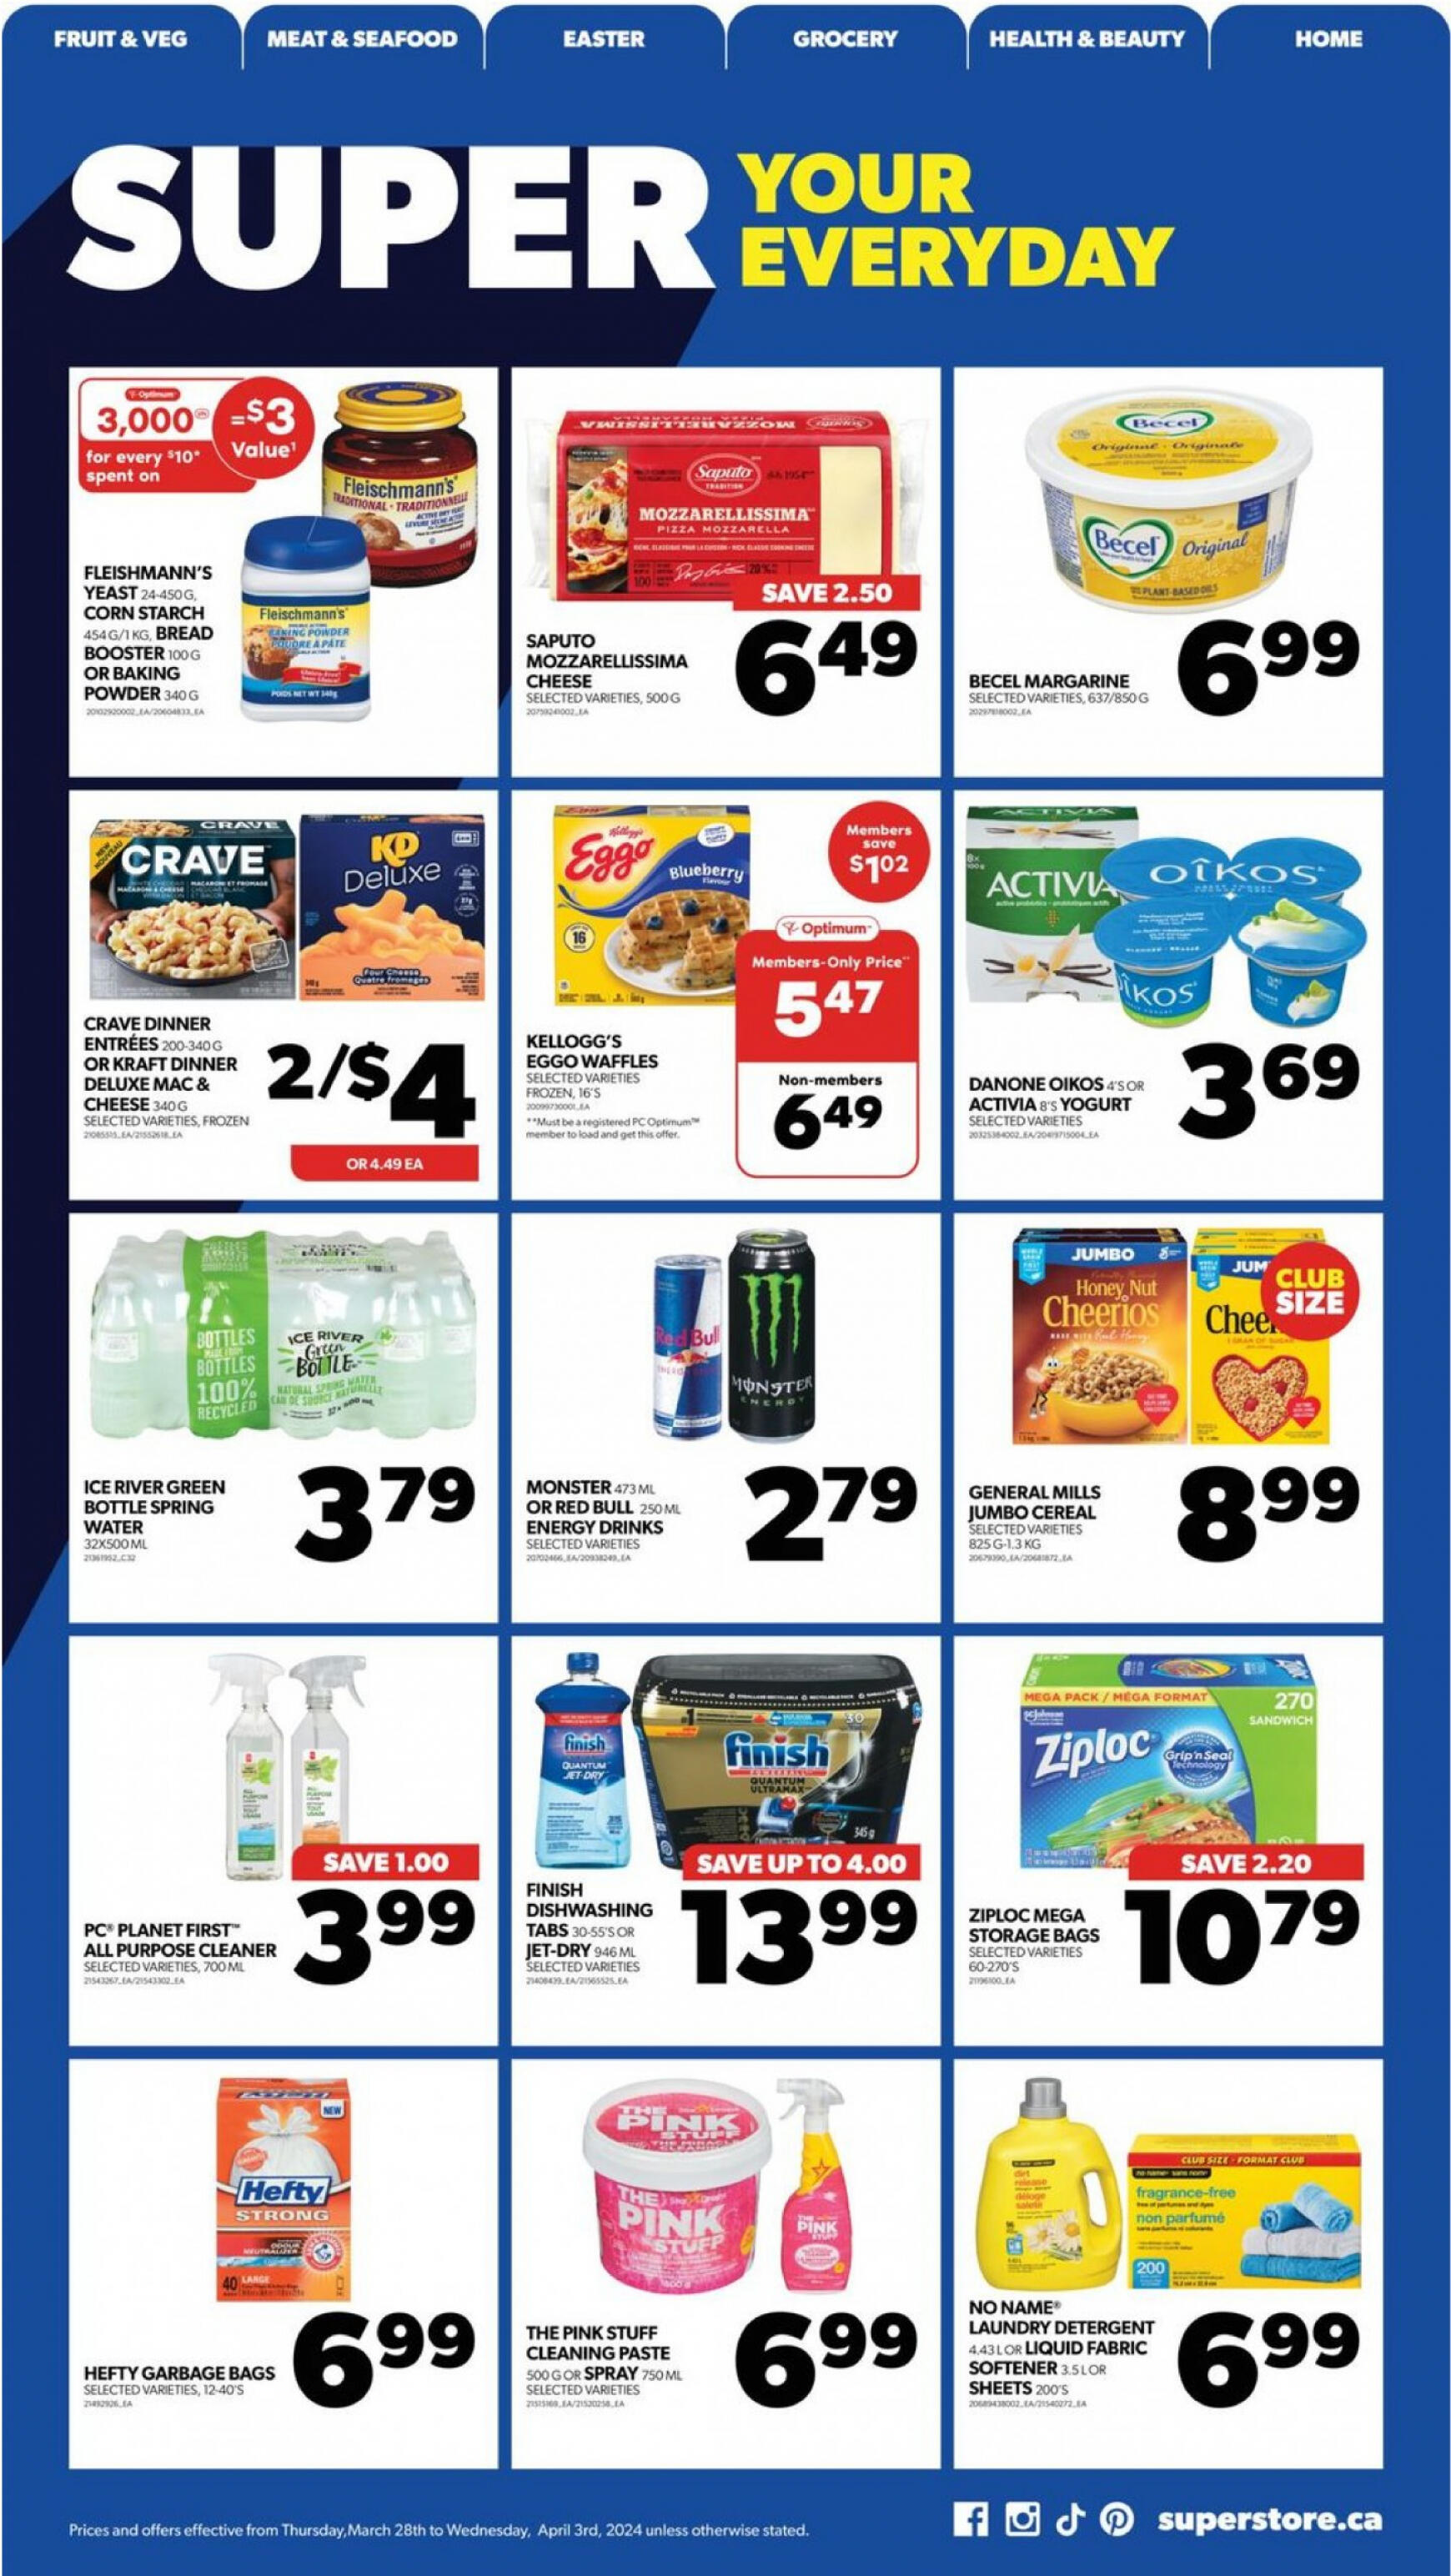 real-canadian-superstore - Real Canadian Superstore flyer current 28.03. - 03.04. - page: 22